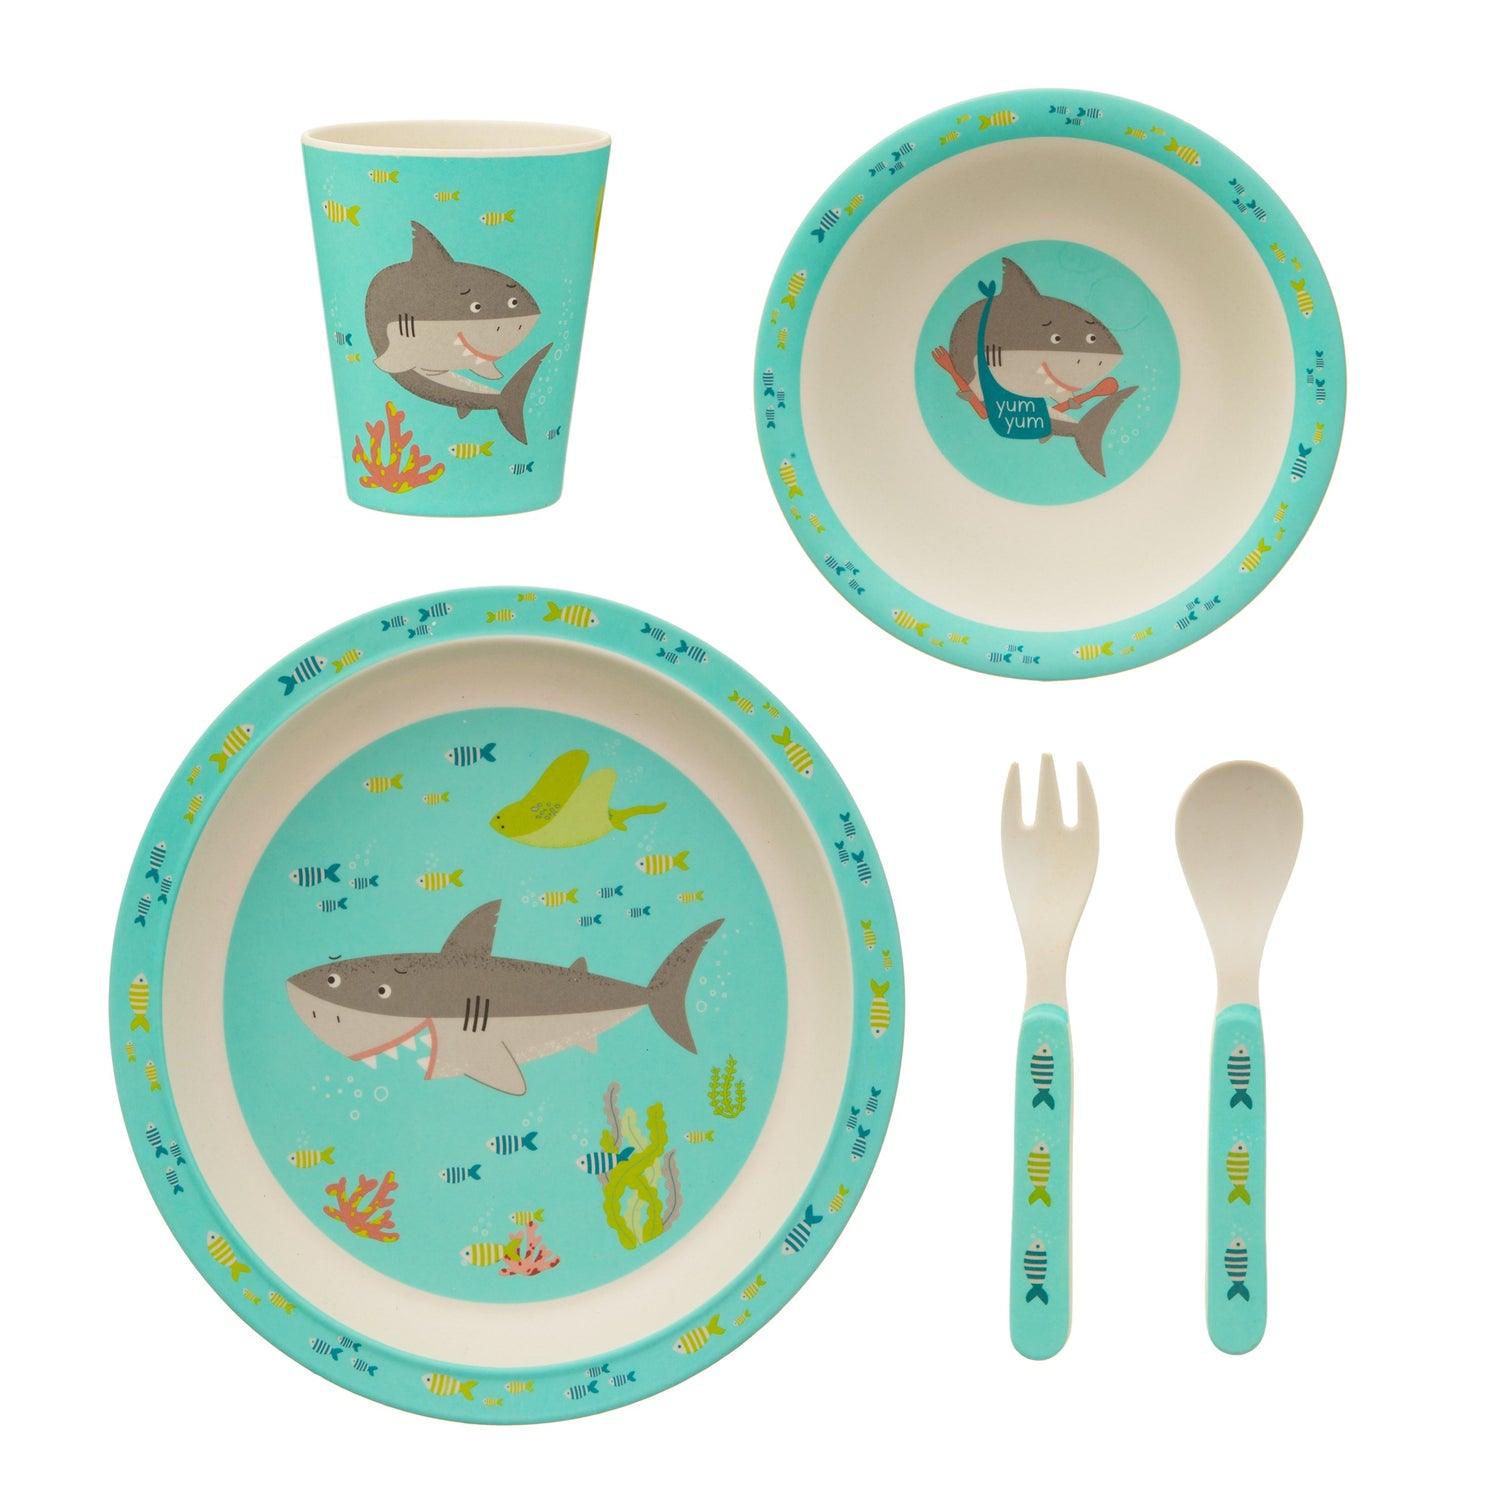 Fancy a swim? Gorgeous bamboo tableware and cutlery set in a green/blue and white design featuring Shelby the Shark and some underwater friends!